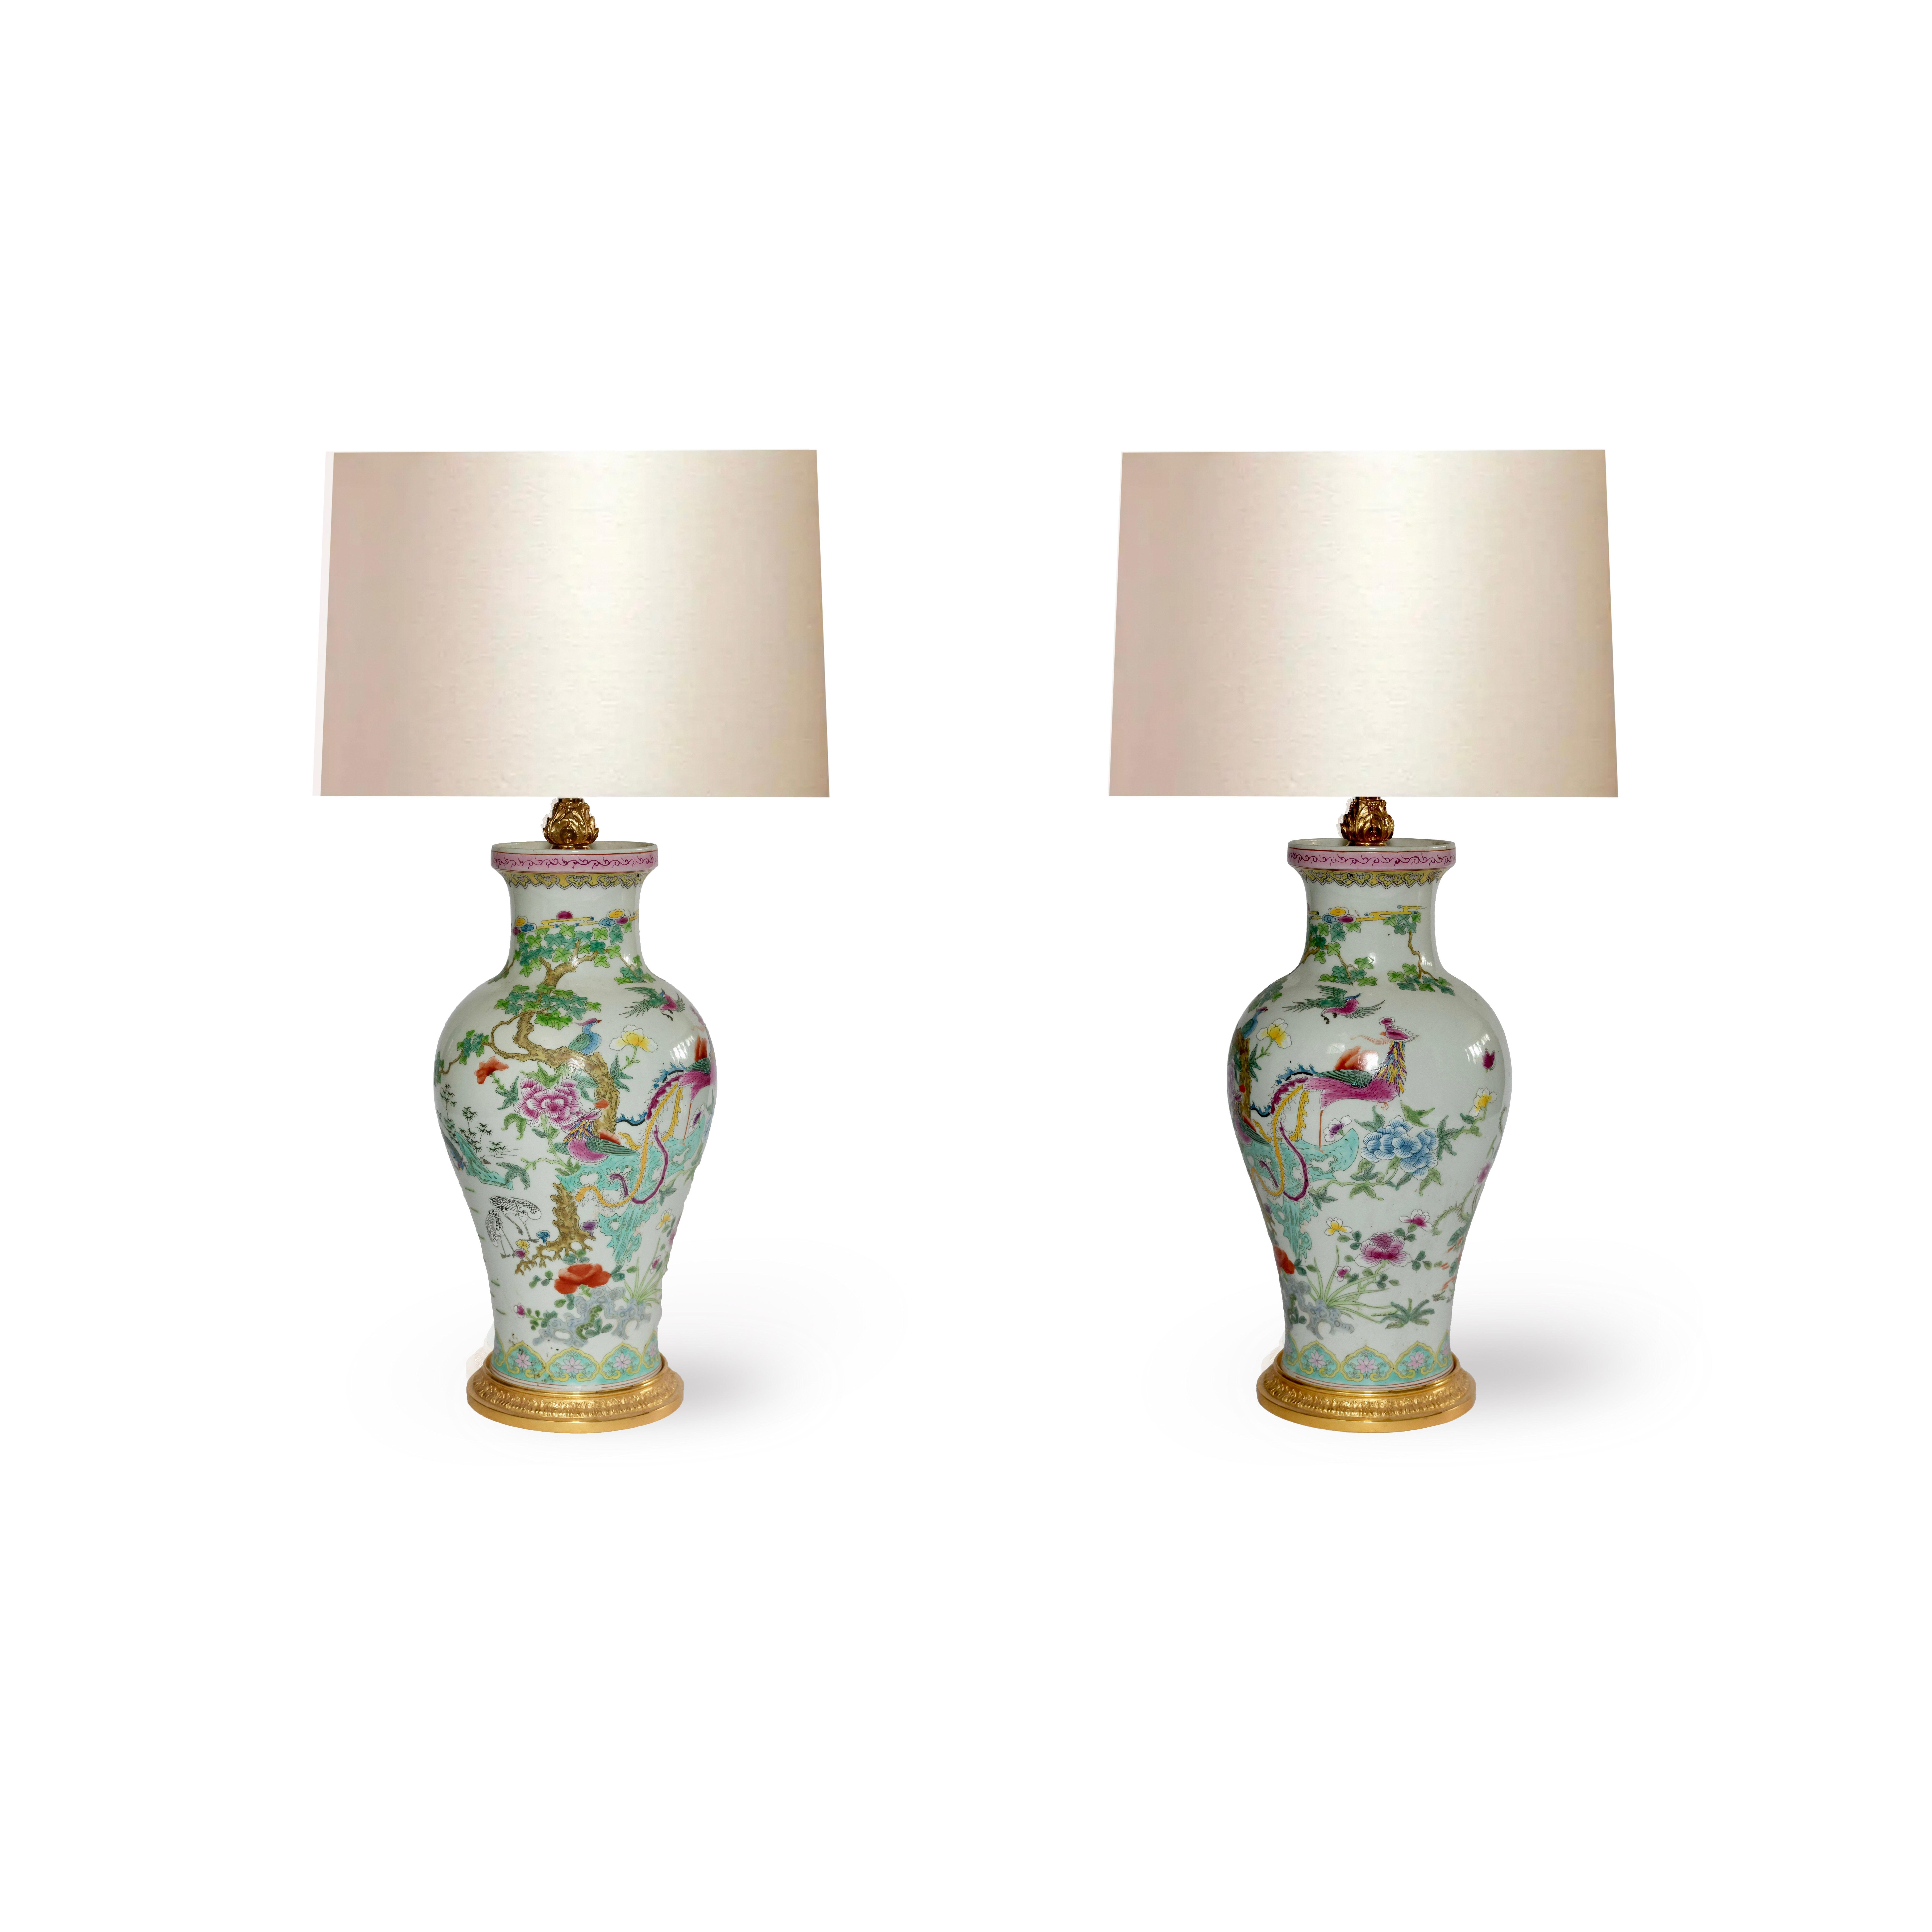 Pair of famille rose porcelain lamps with gilt brass decorations,each lamp installed two E26 sockets.
To the top of the porcelain vase 19 inch.
Lampshades are not included.